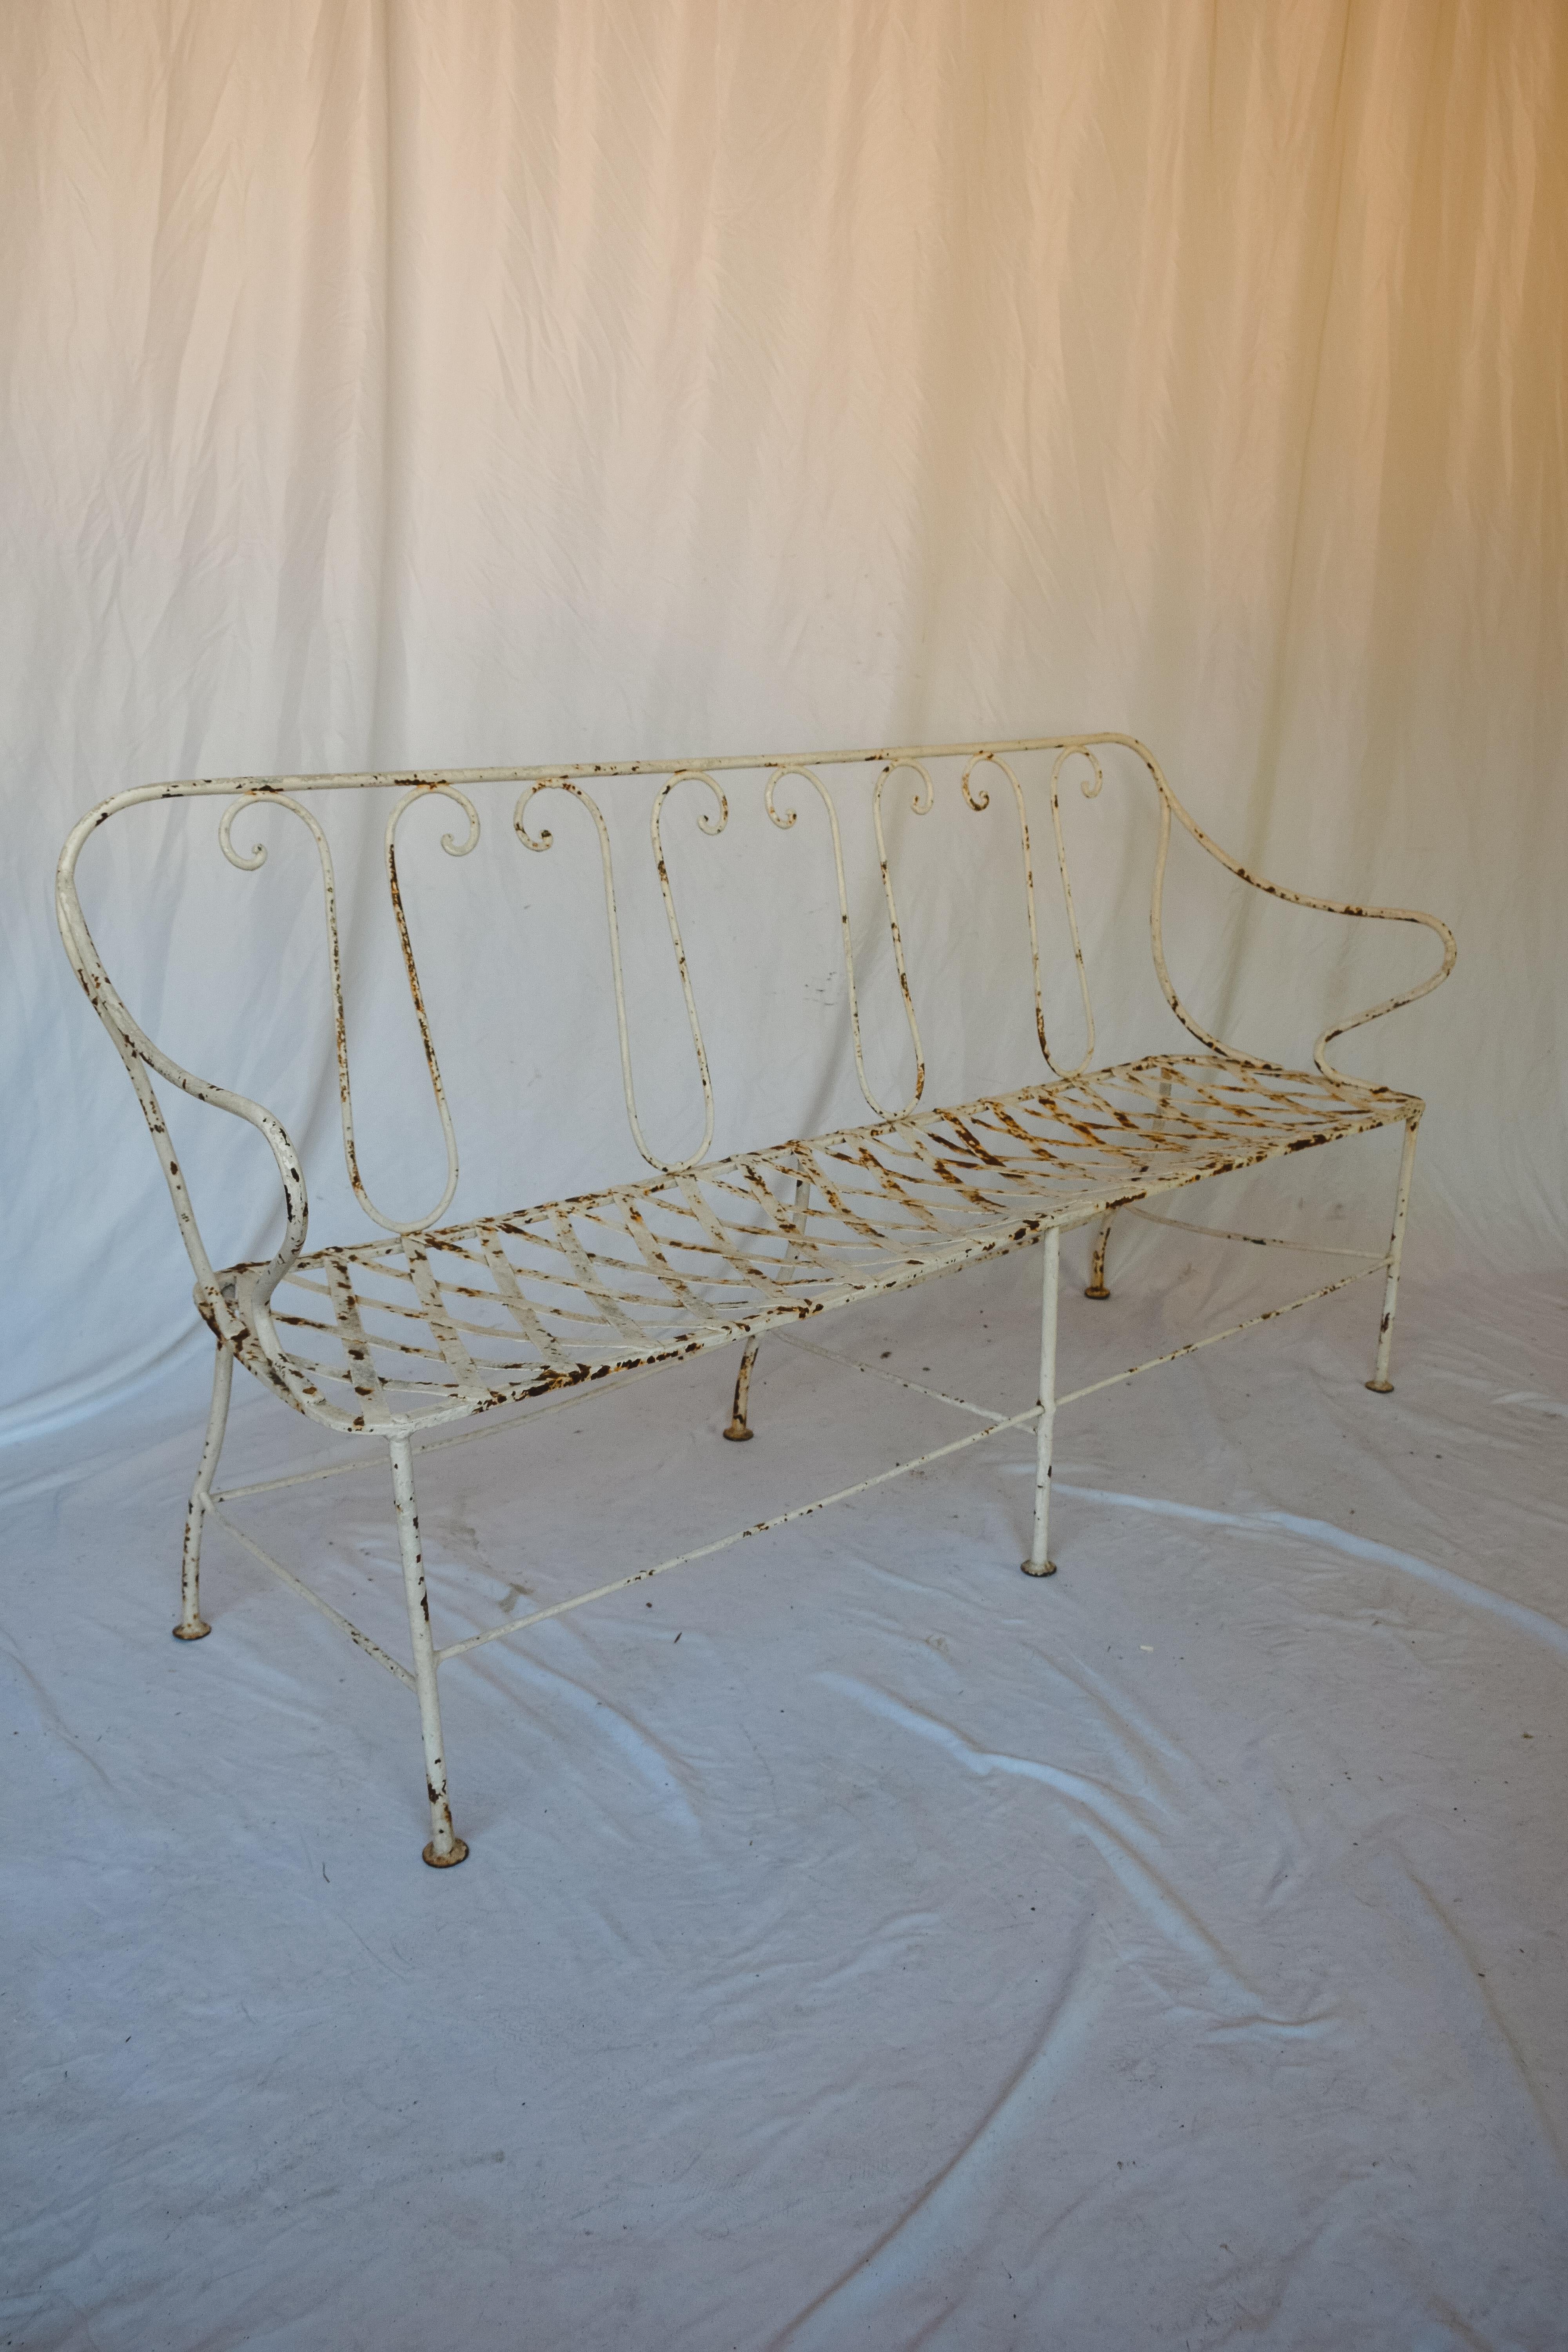 This French antique metal garden settee is from the Second French Empire , which was the 18-year Imperial Bonapartist regime of Napoleon III from 14 January 1852 to 27 October 1870. The arms are referred to as 